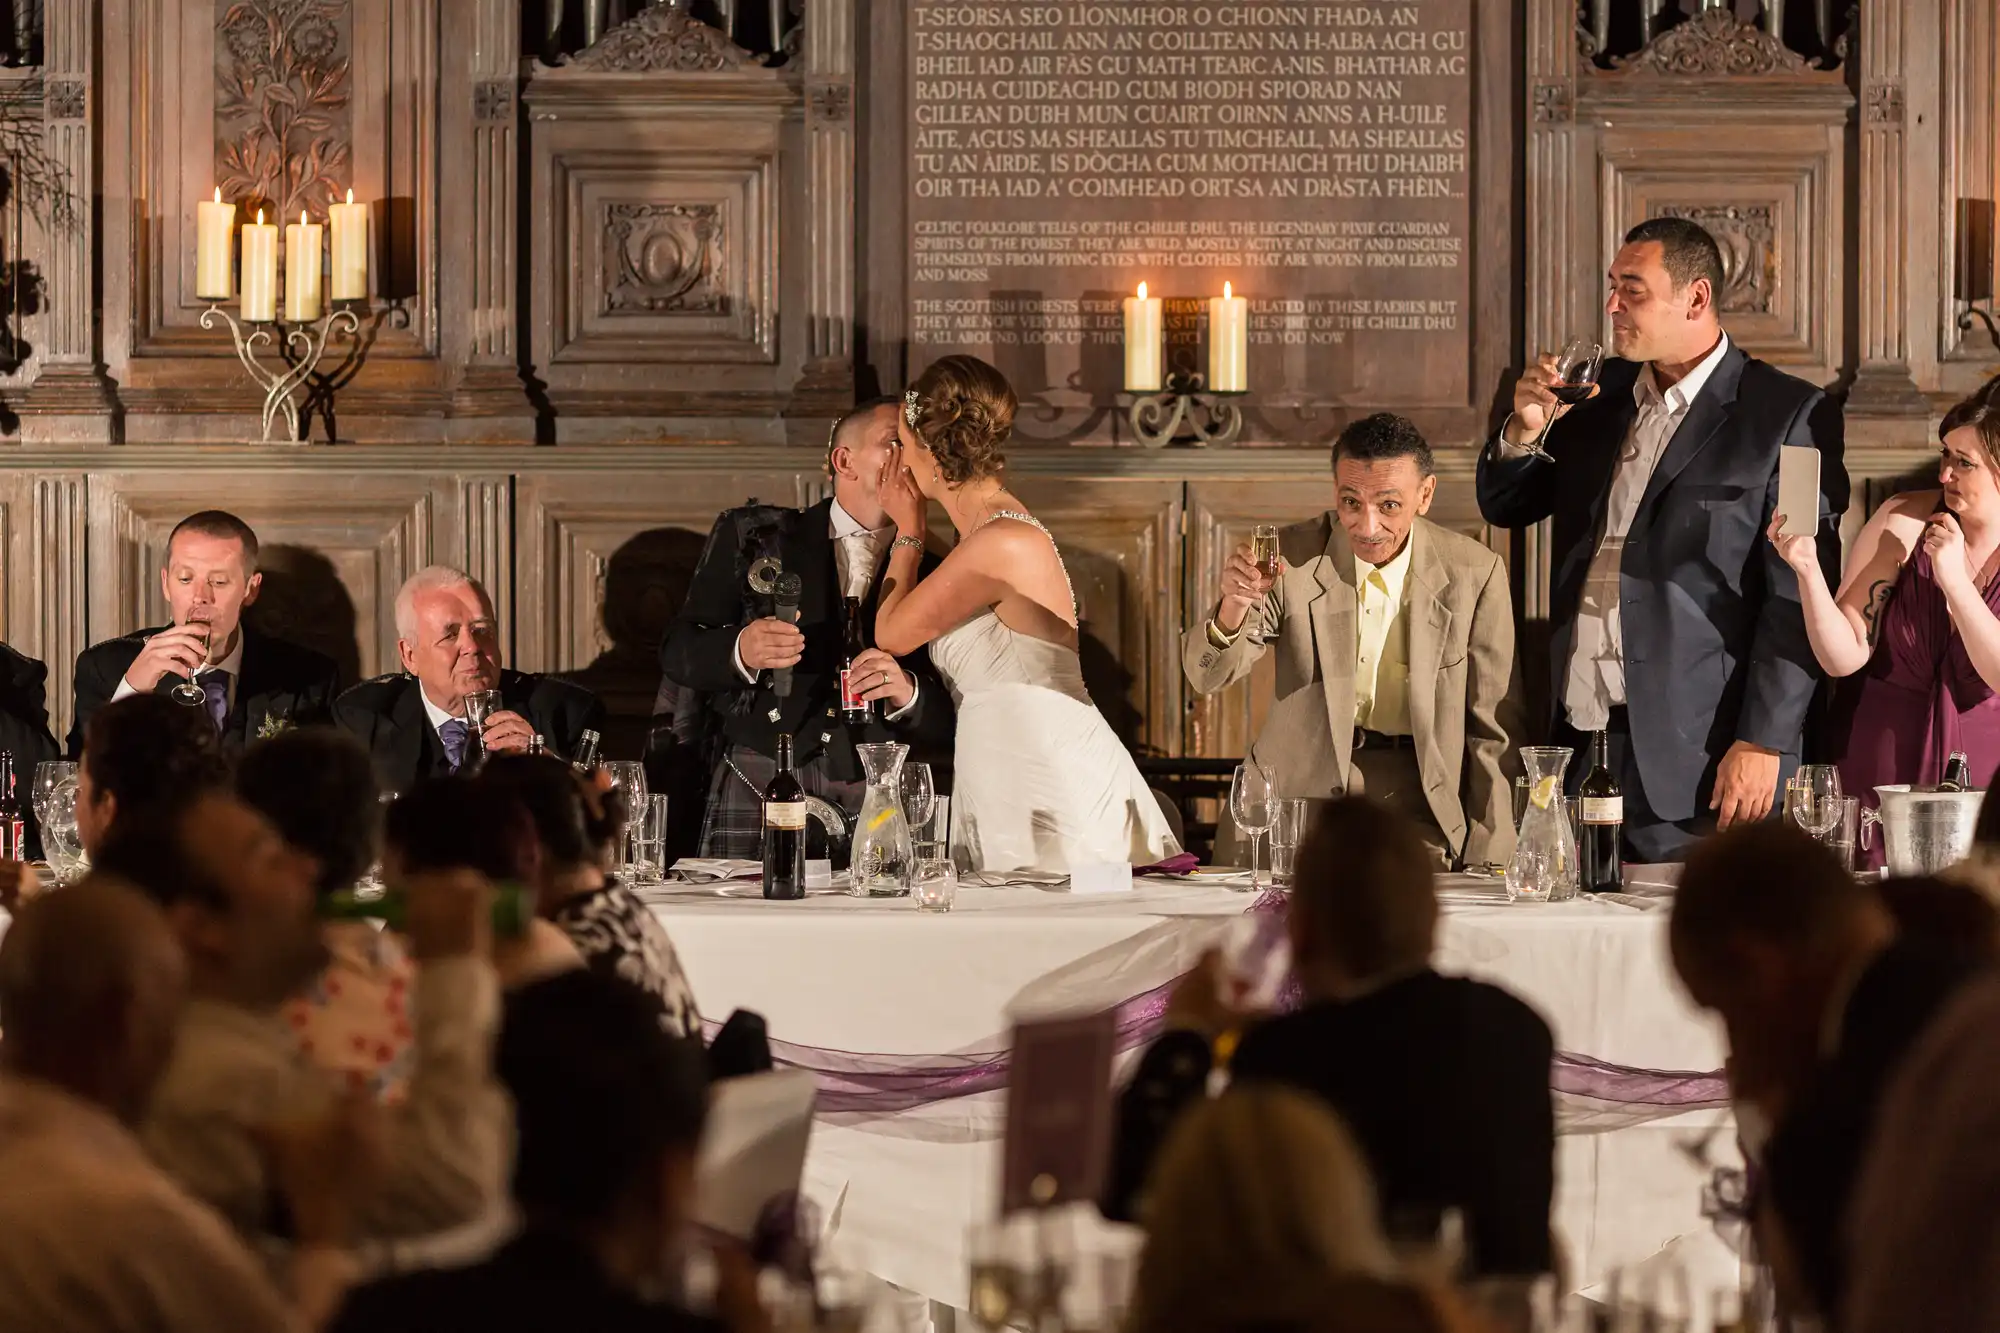 A bride and groom perform a toast at their wedding reception, surrounded by guests and ornate decor in a lavishly decorated room.